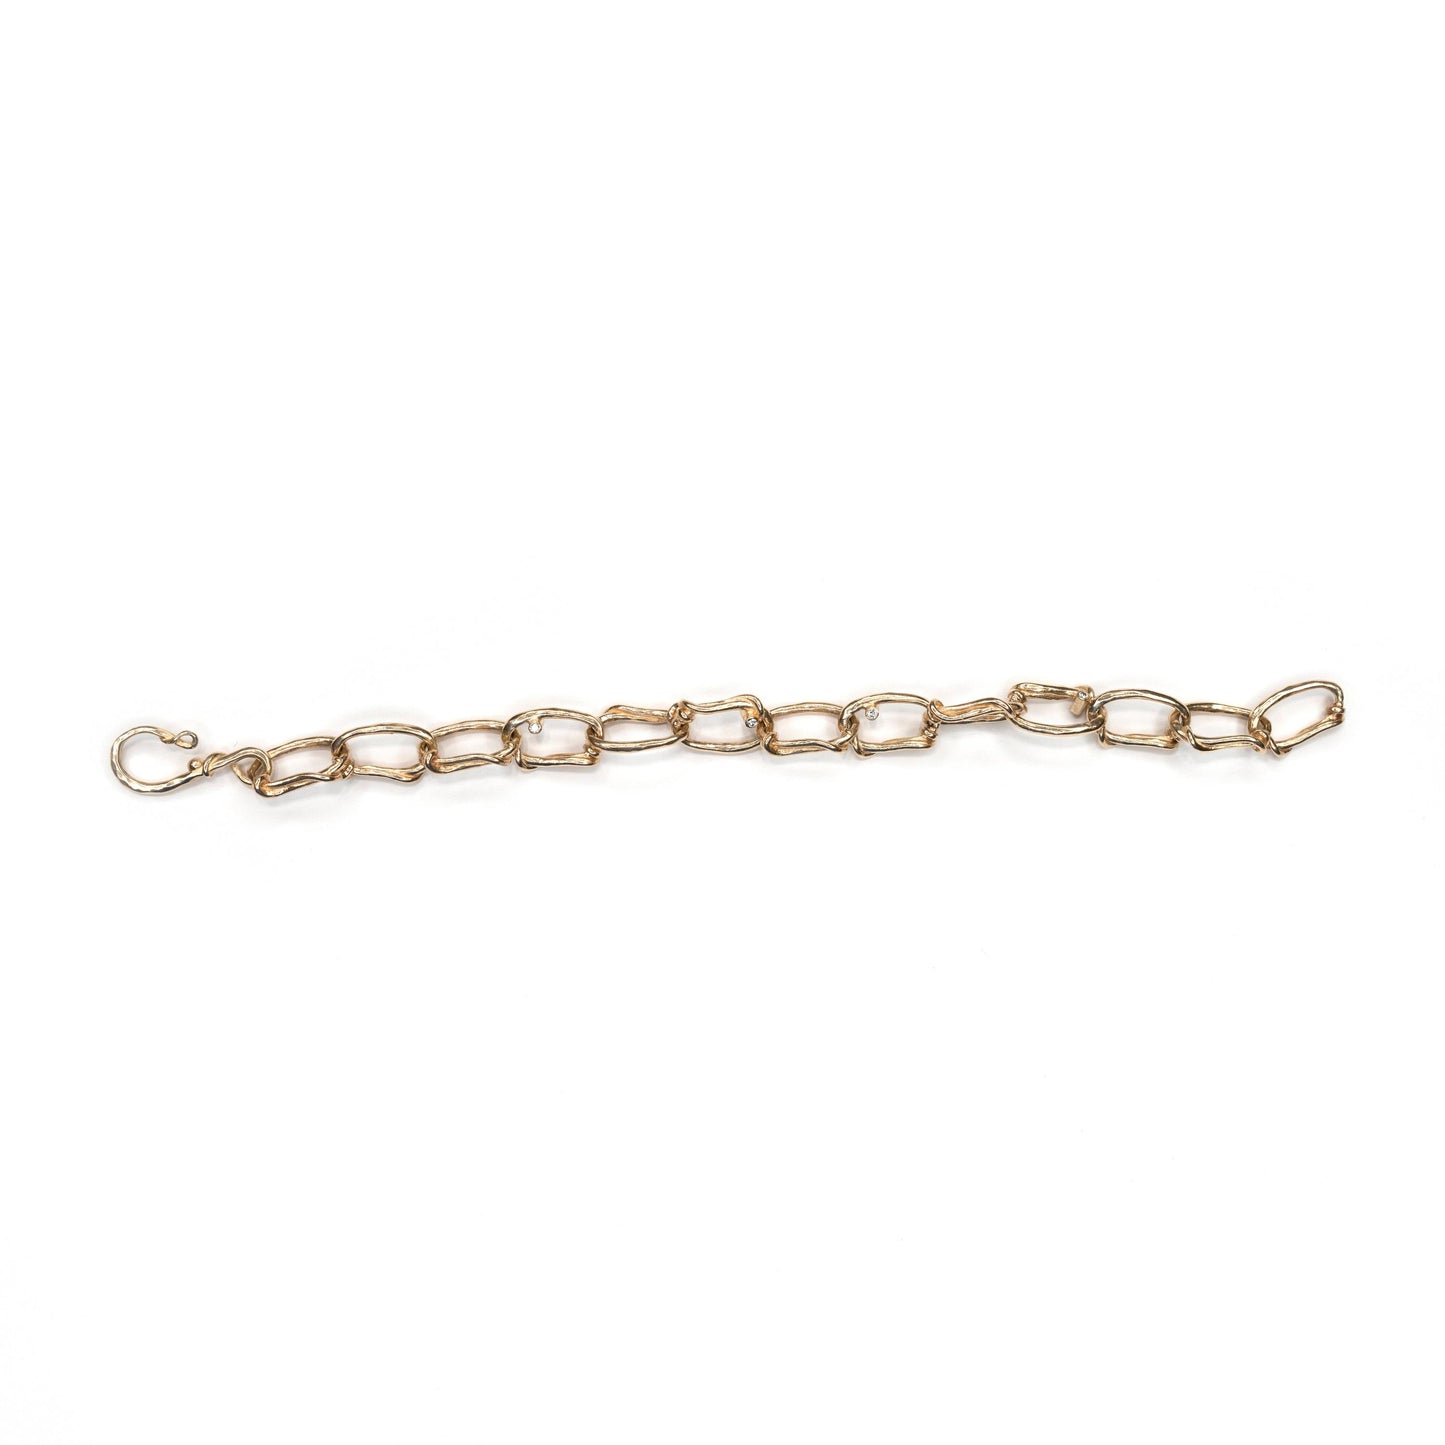 14k Oval Link Chunky Chain Yellow or White Gold Bracelet with Diamonds